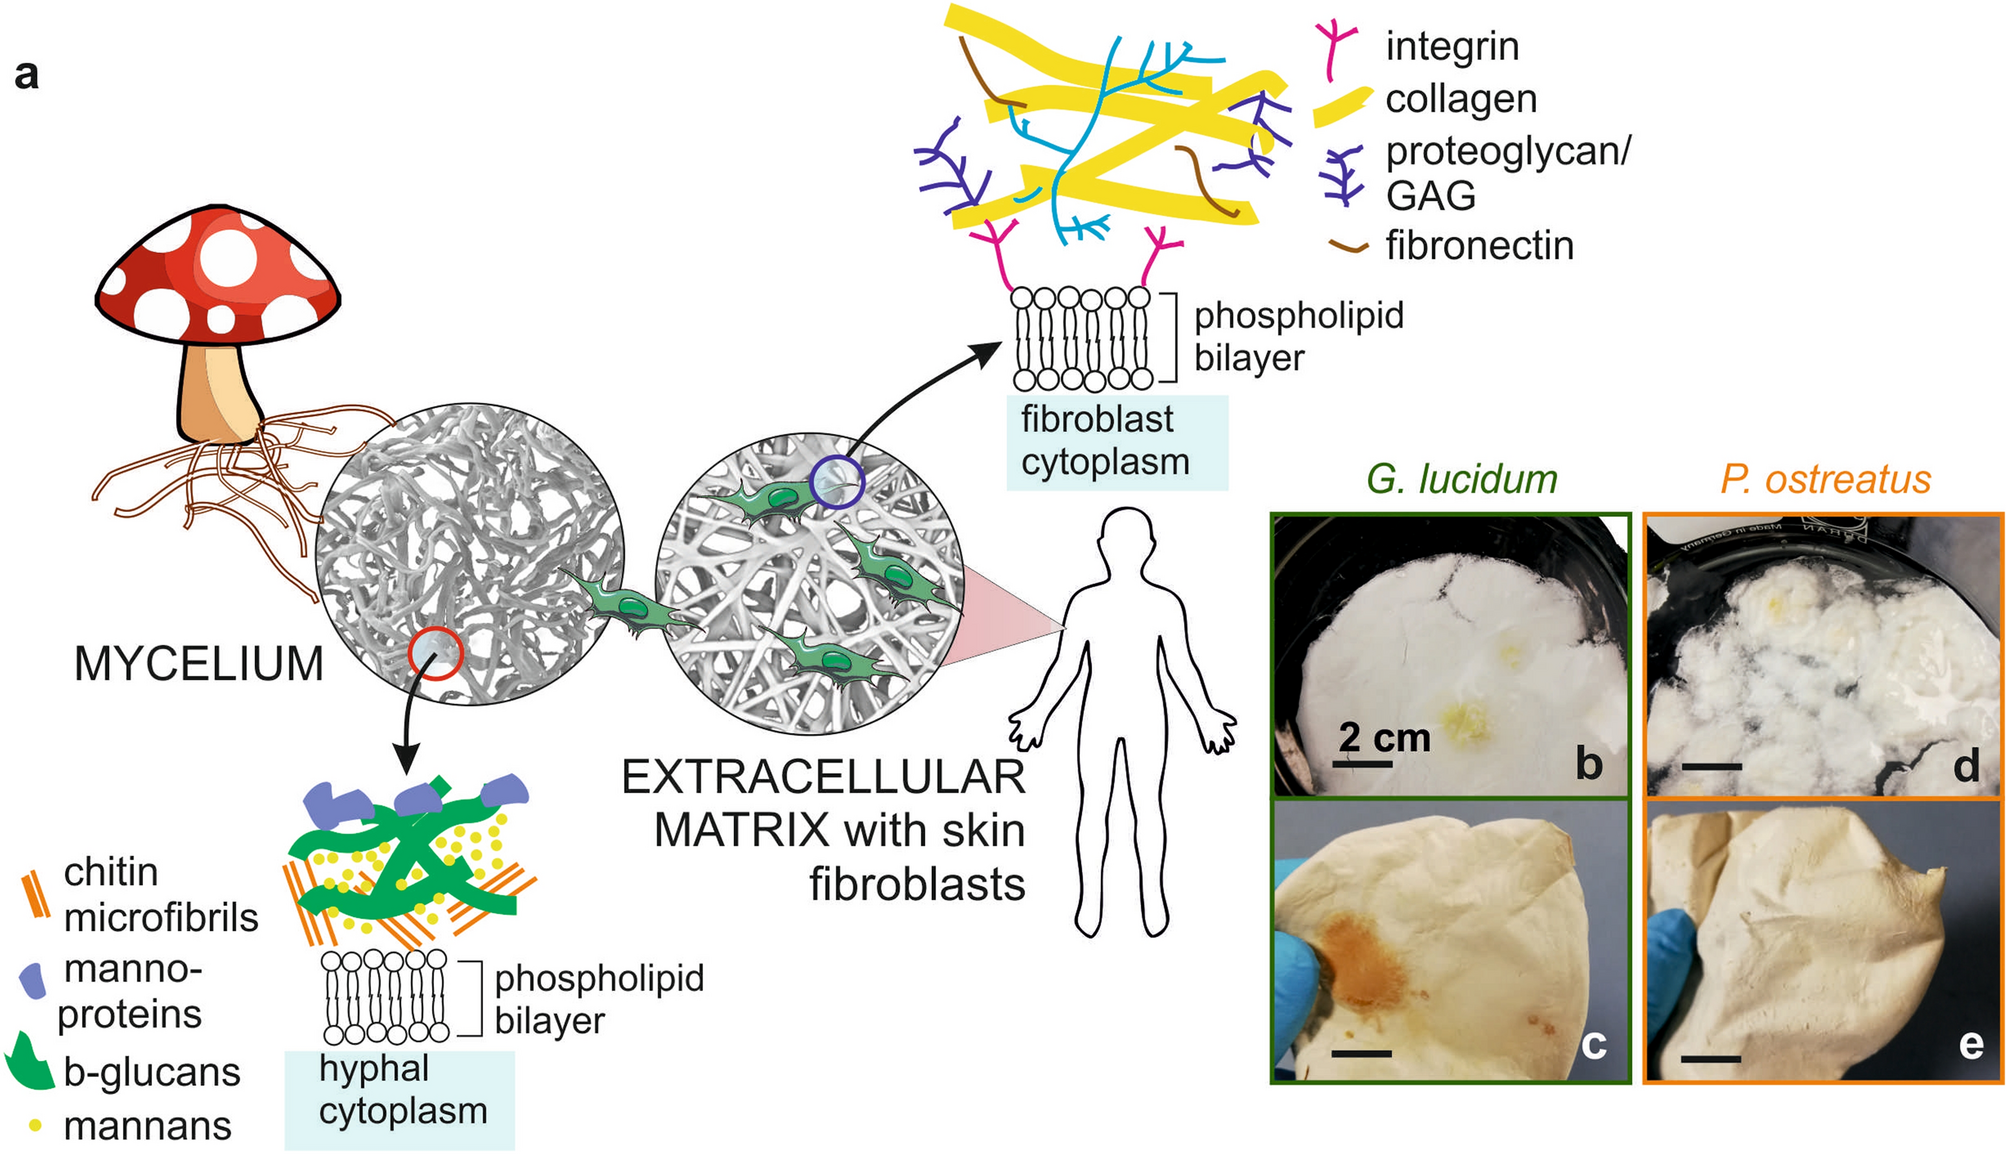 Advanced mycelium materials as potential self-growing biomedical scaffolds  | Scientific Reports